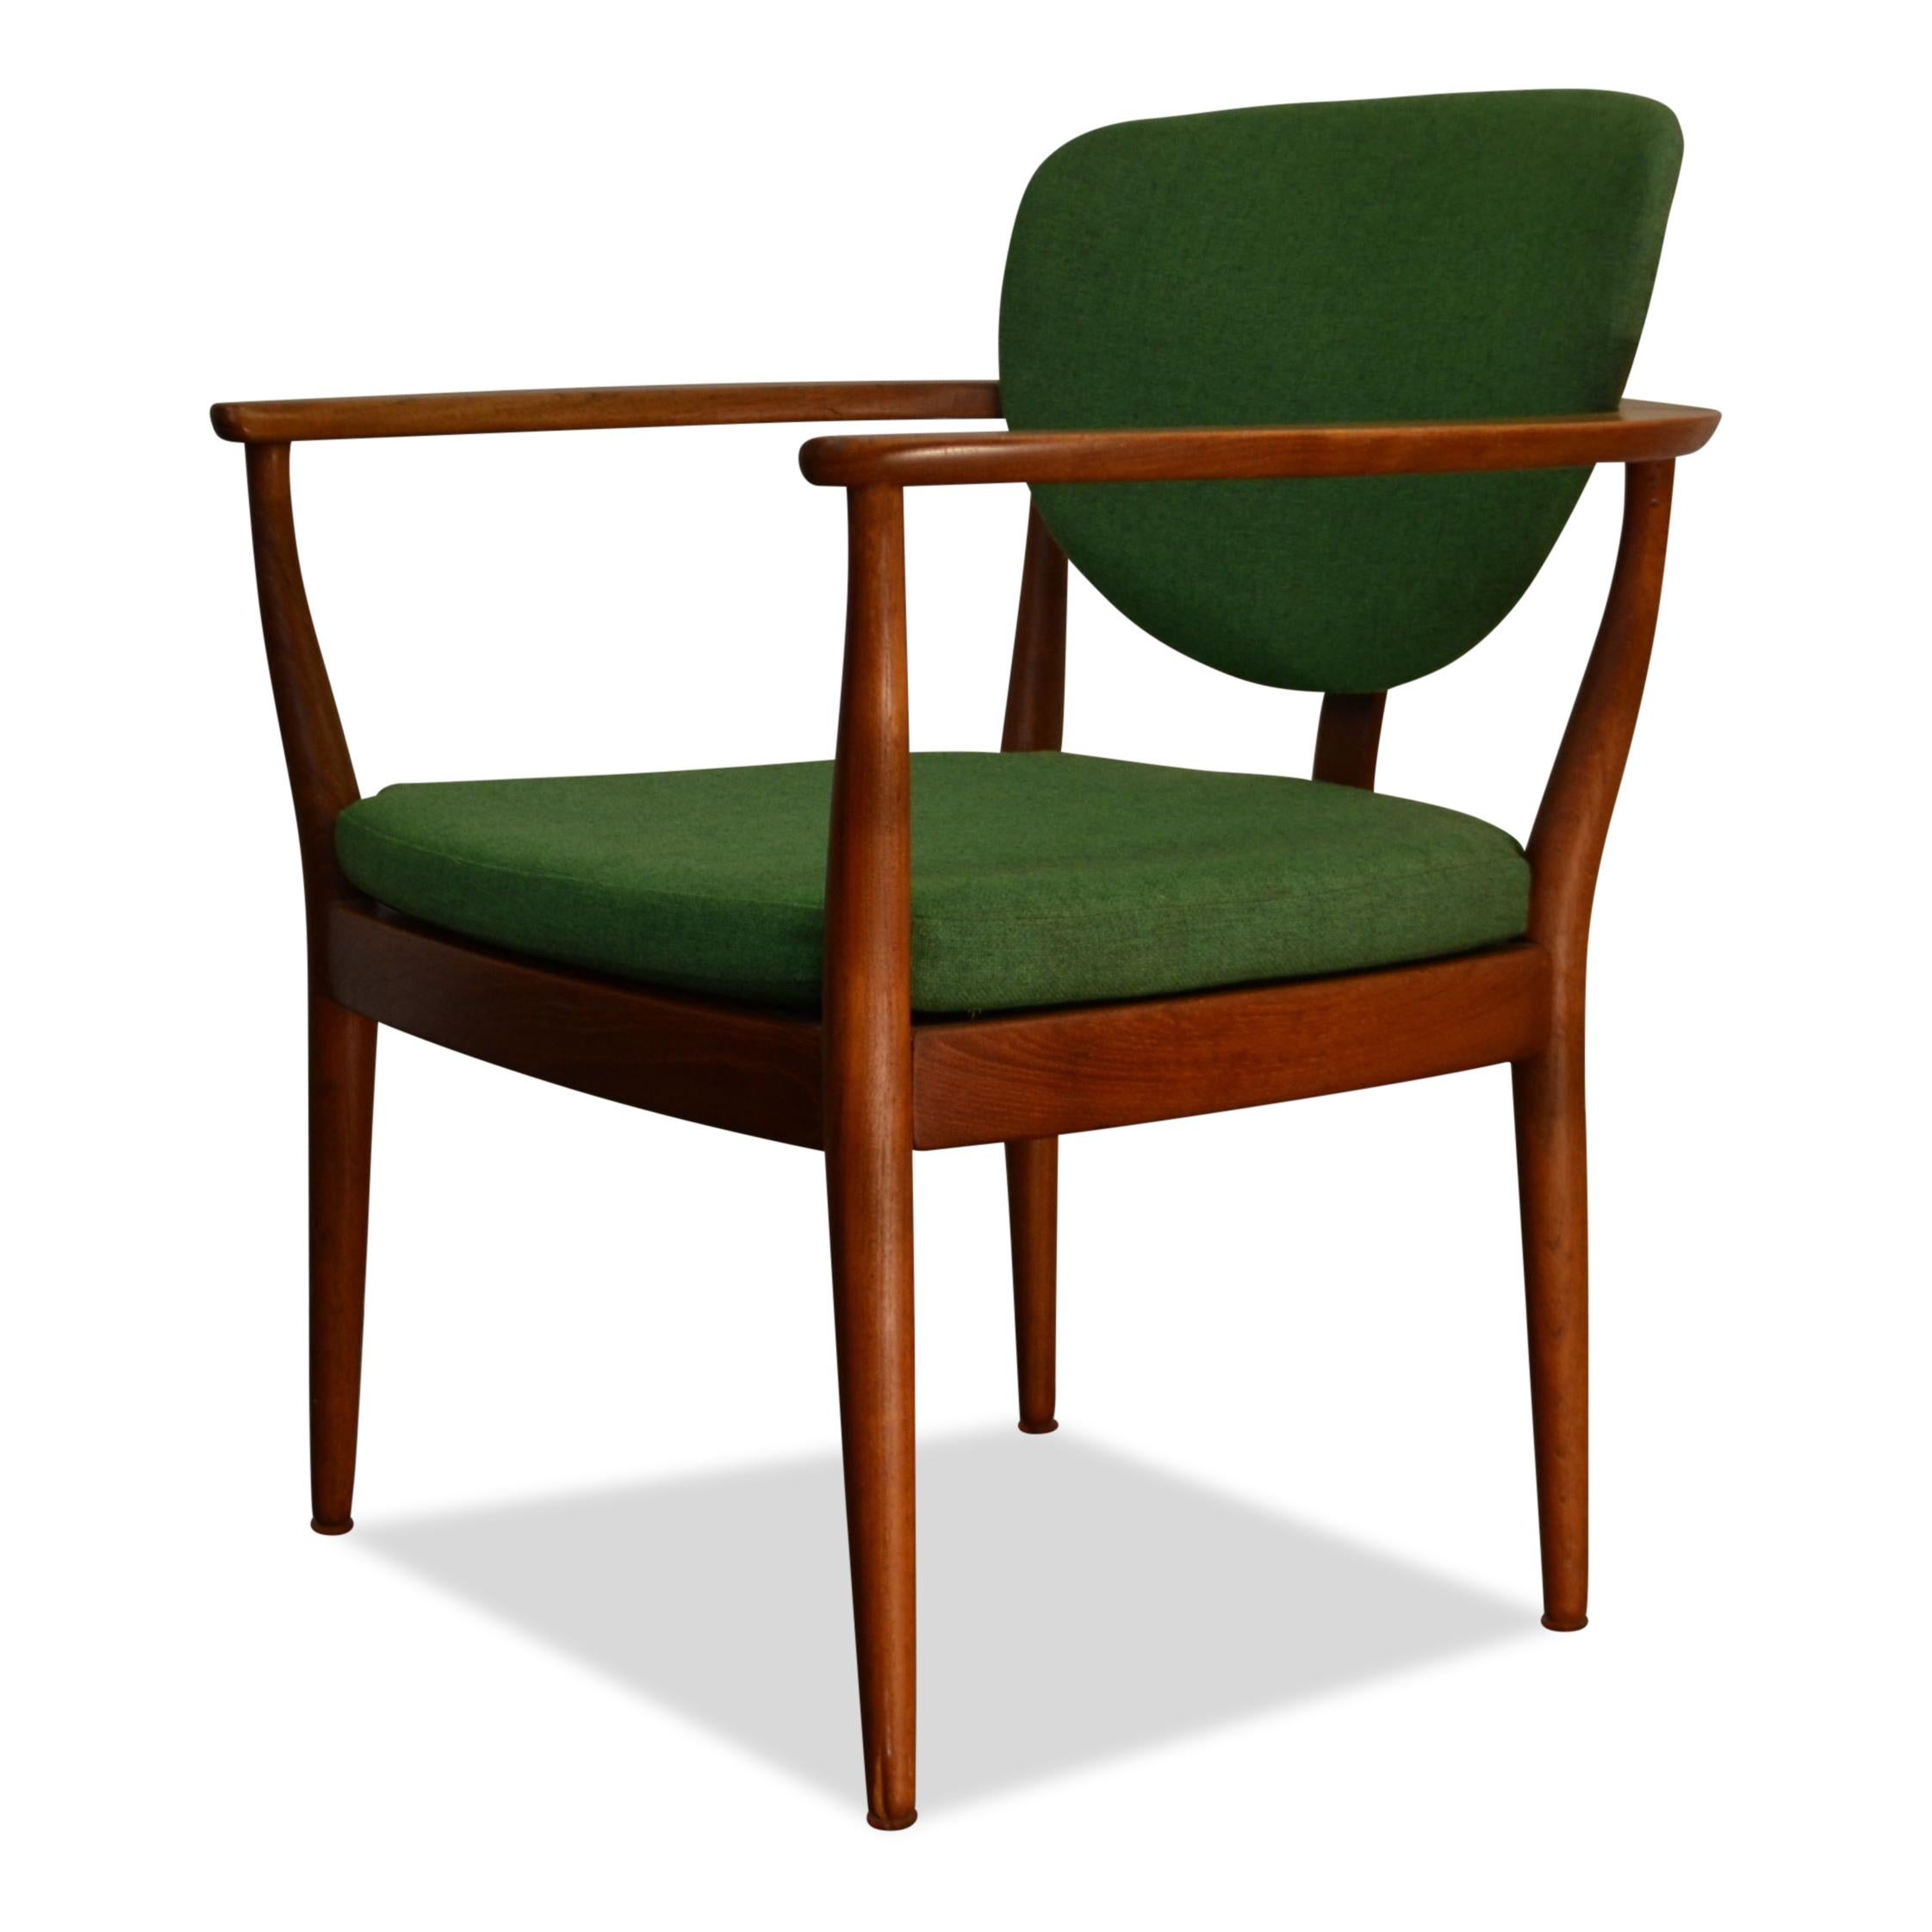 Super stylish vintage lounge chair designed by an unknown Danish designer. Made out of beautiful teakwood, upholstered in beautiful green woven fabric, loose seat cushions and featuring gorgeous curved backrest. This chair just breaths 1960s Danish